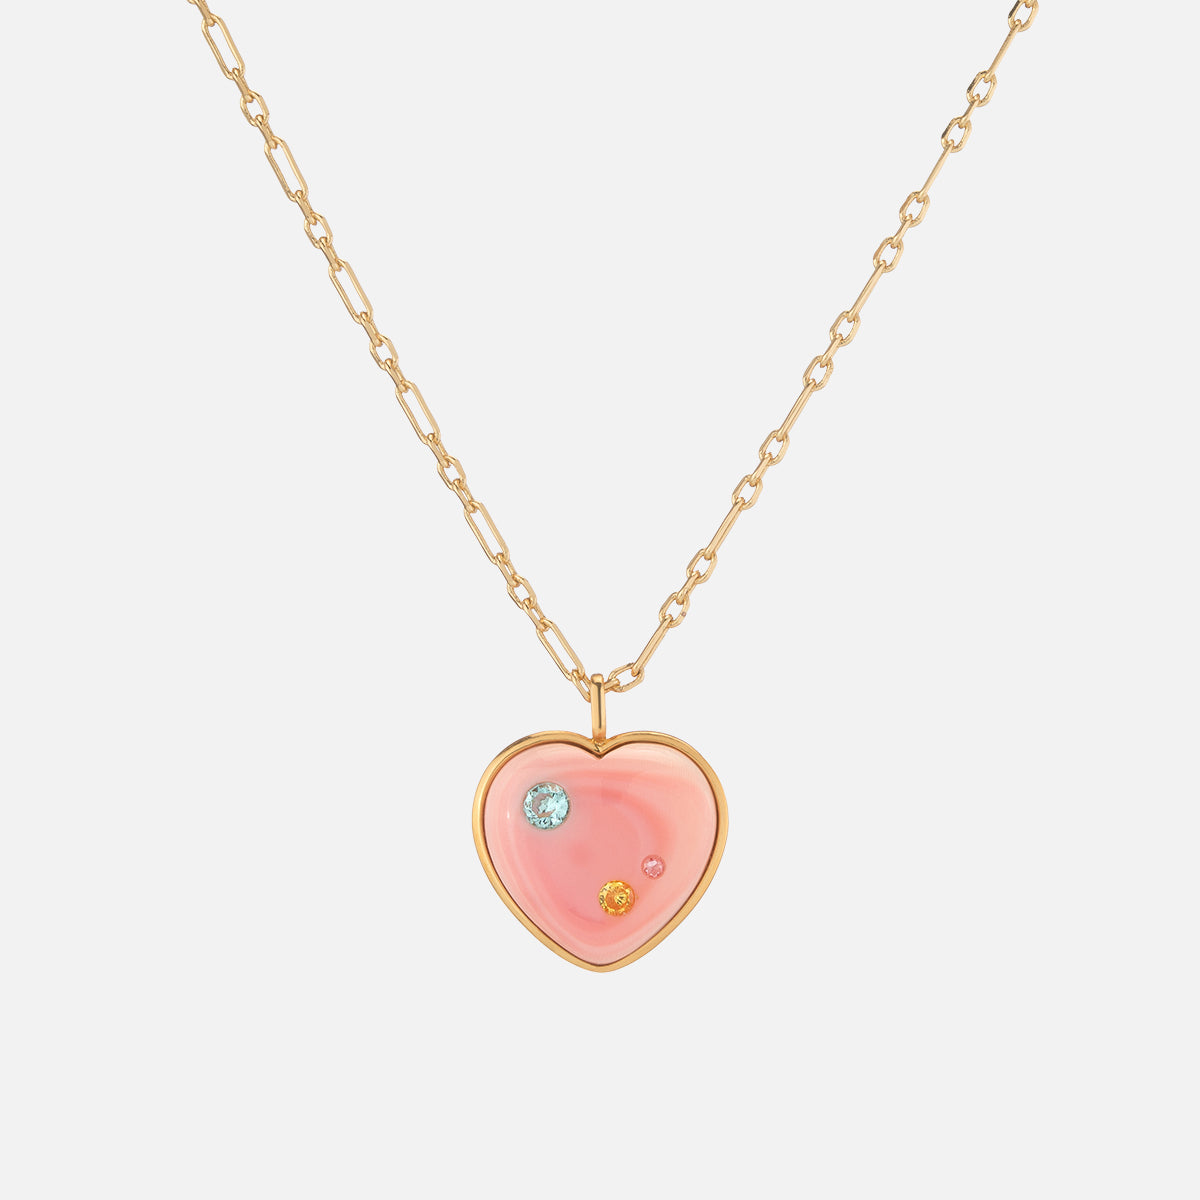 Cotton Candy Heart to Heart Necklace